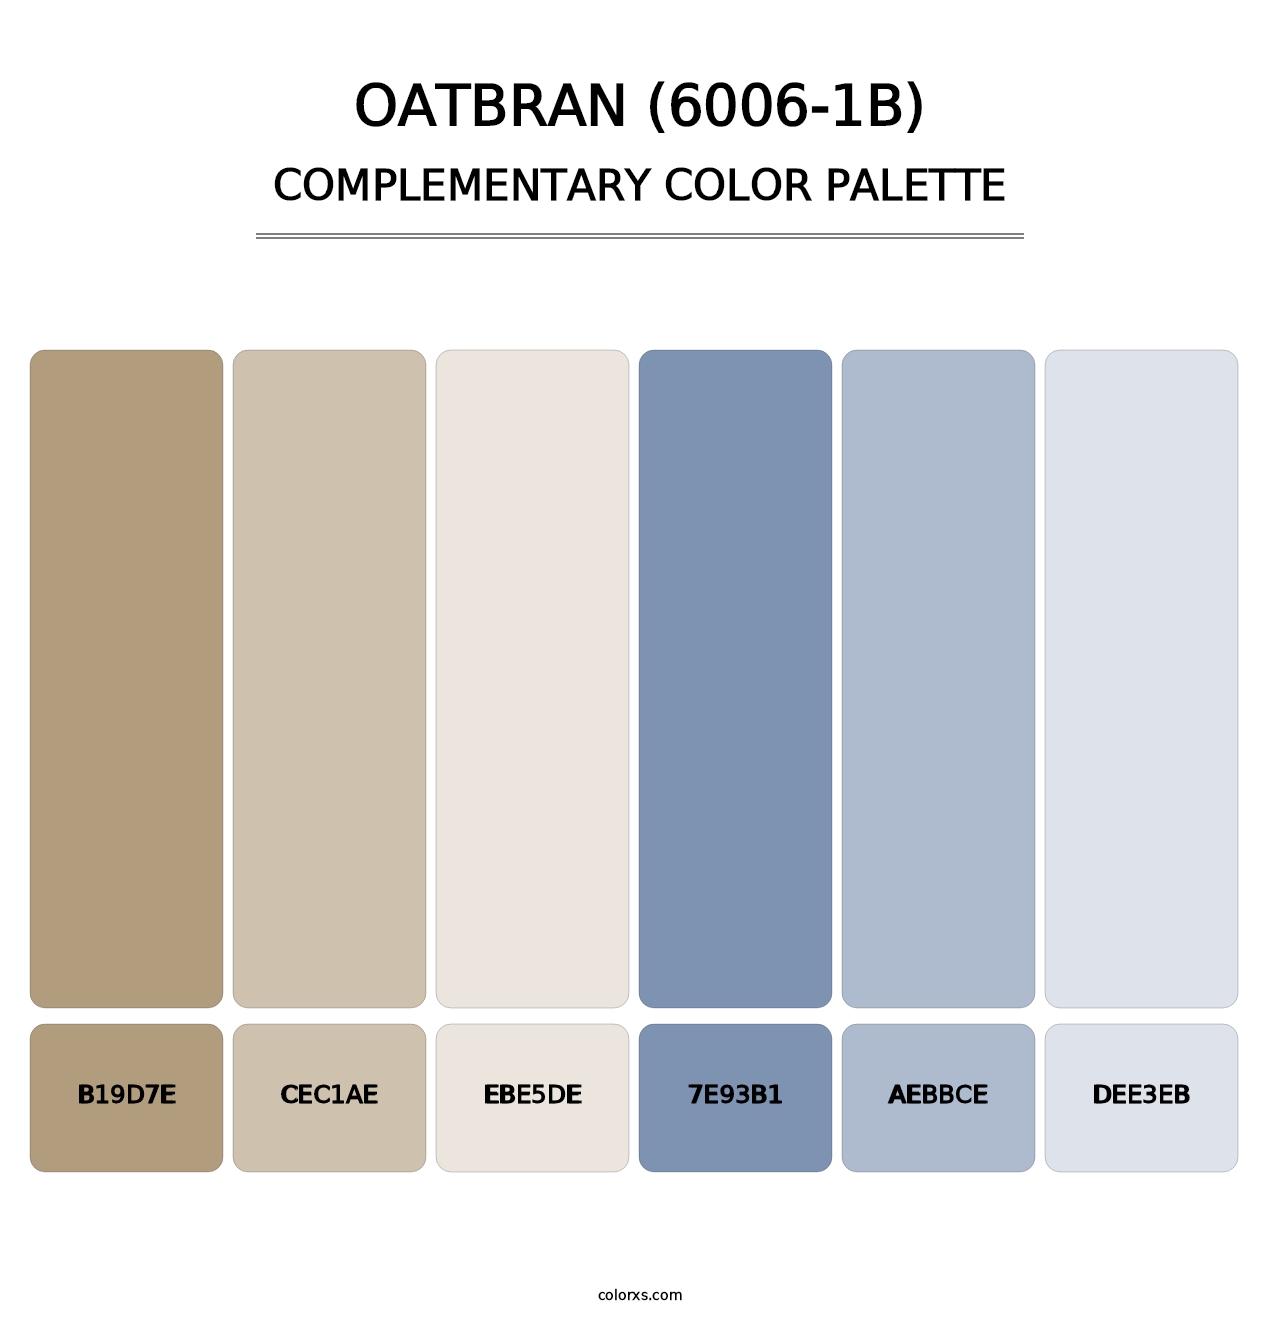 Oatbran (6006-1B) - Complementary Color Palette